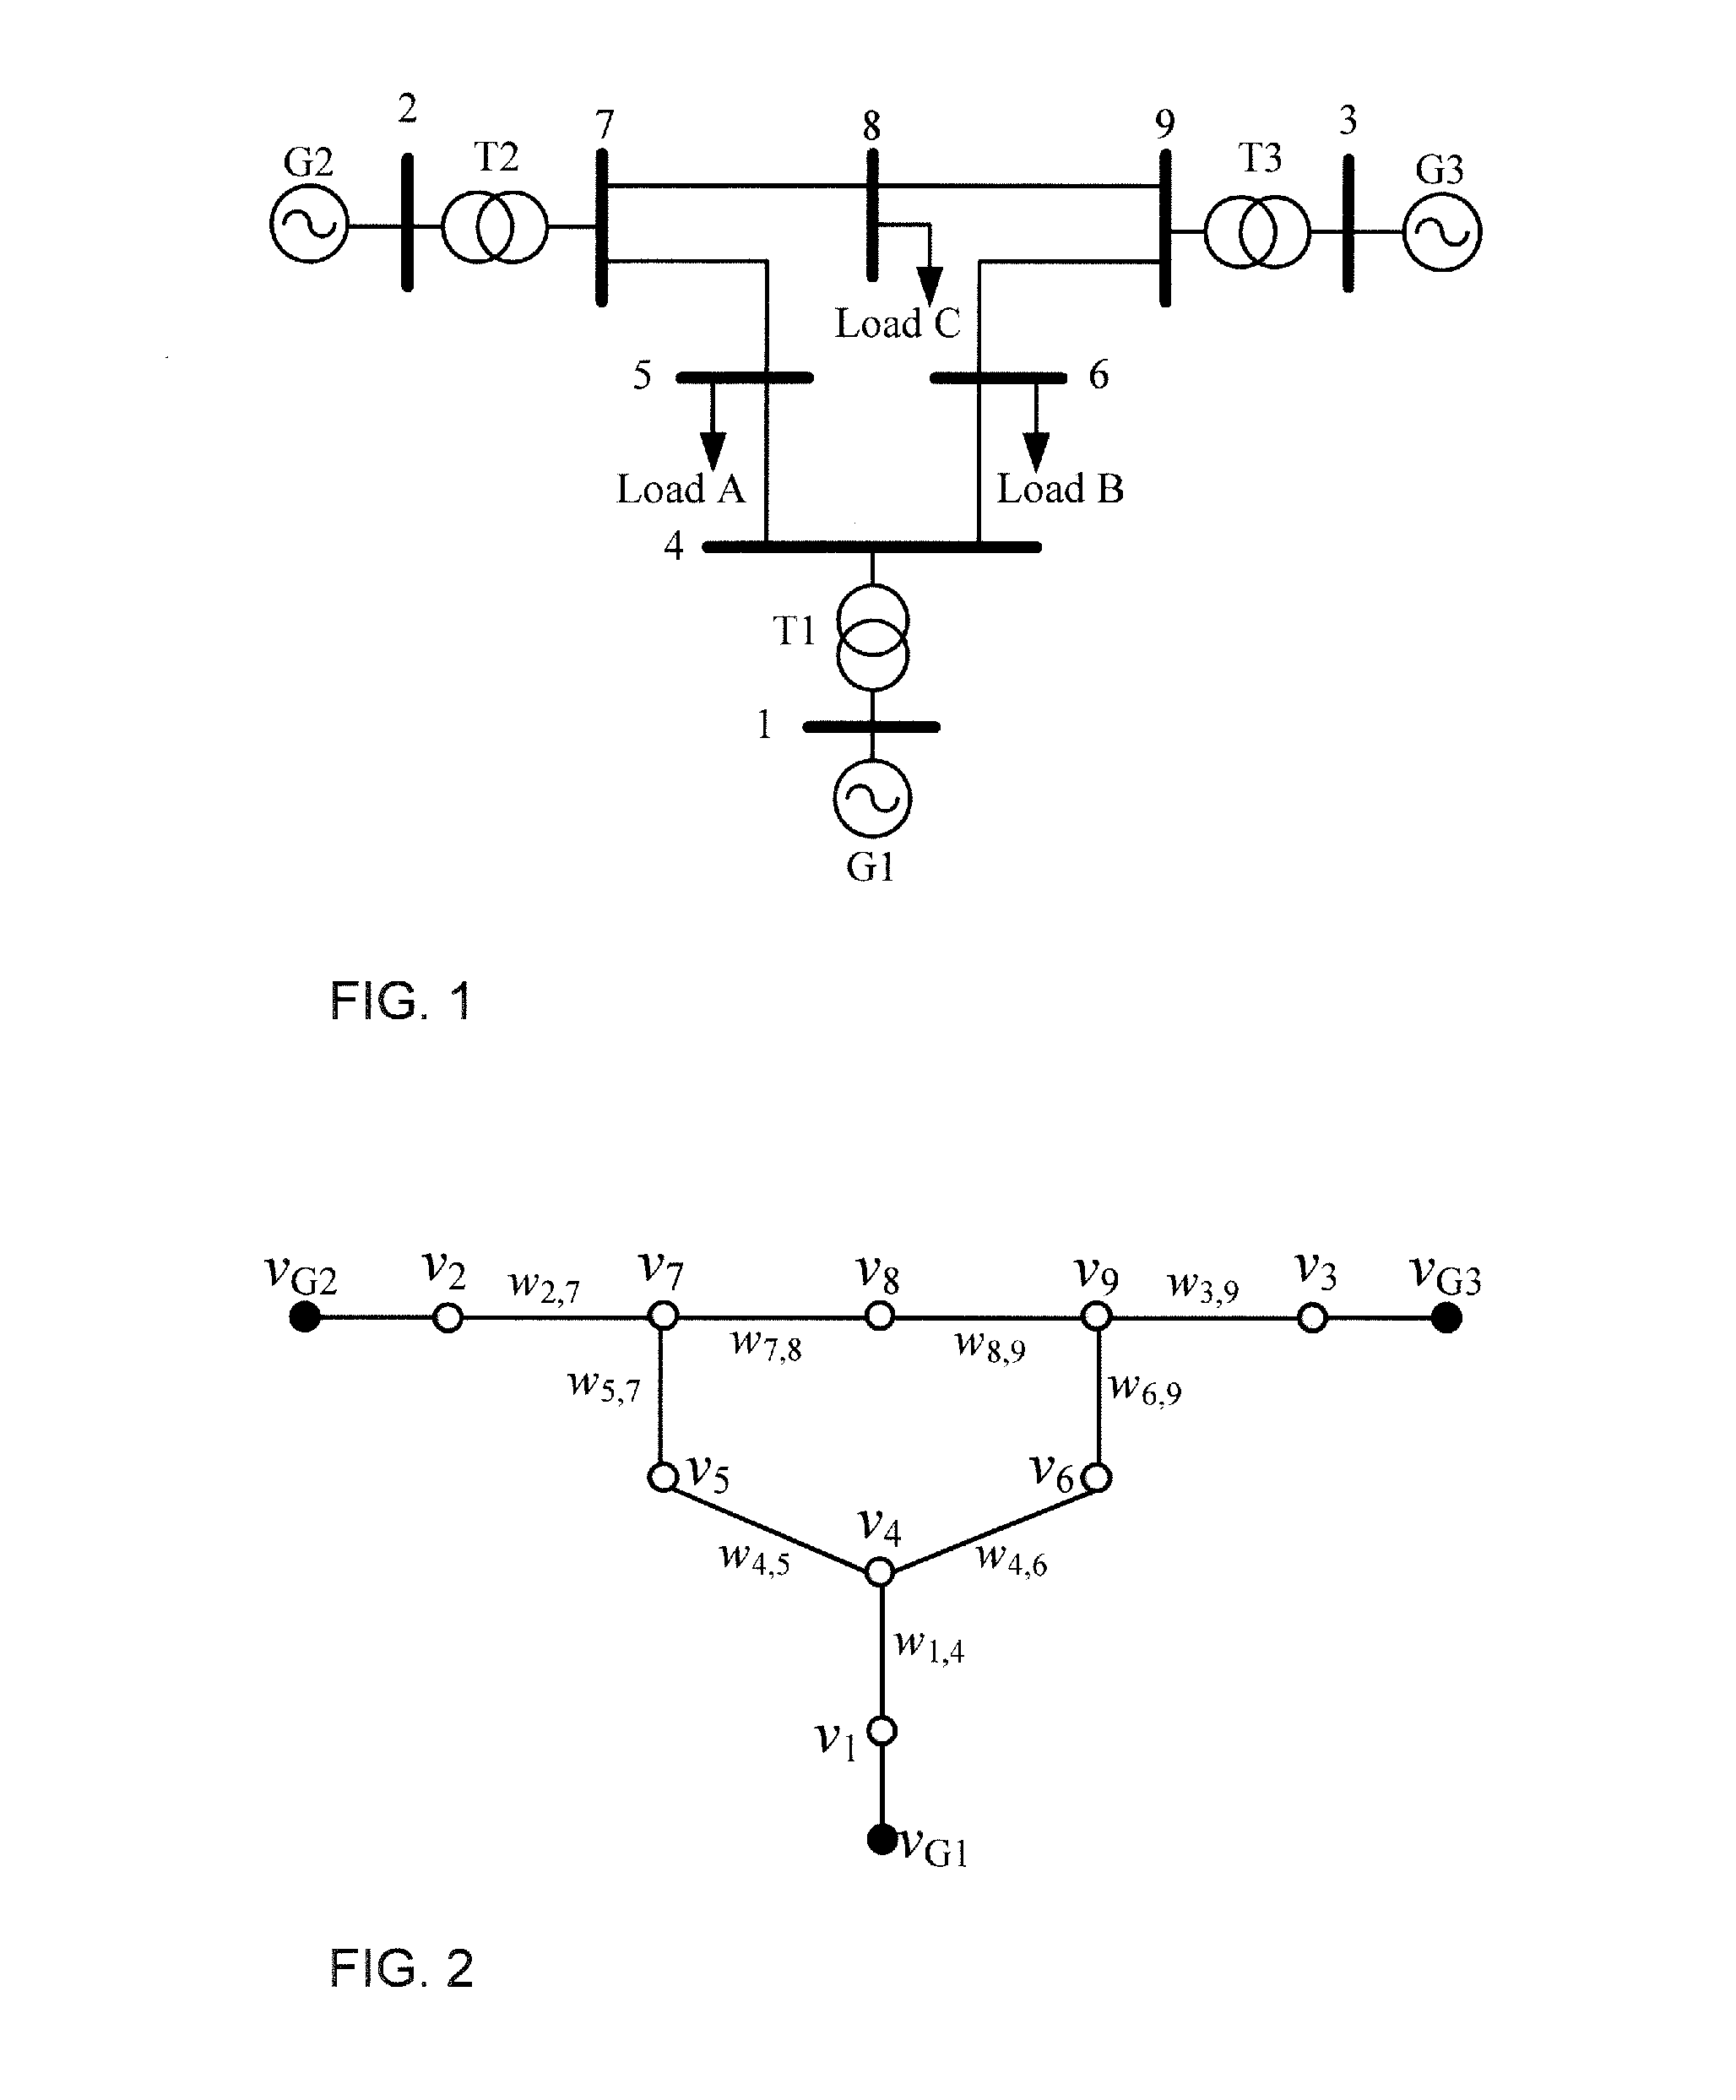 Method of determining an islanding solution for an electrical power system